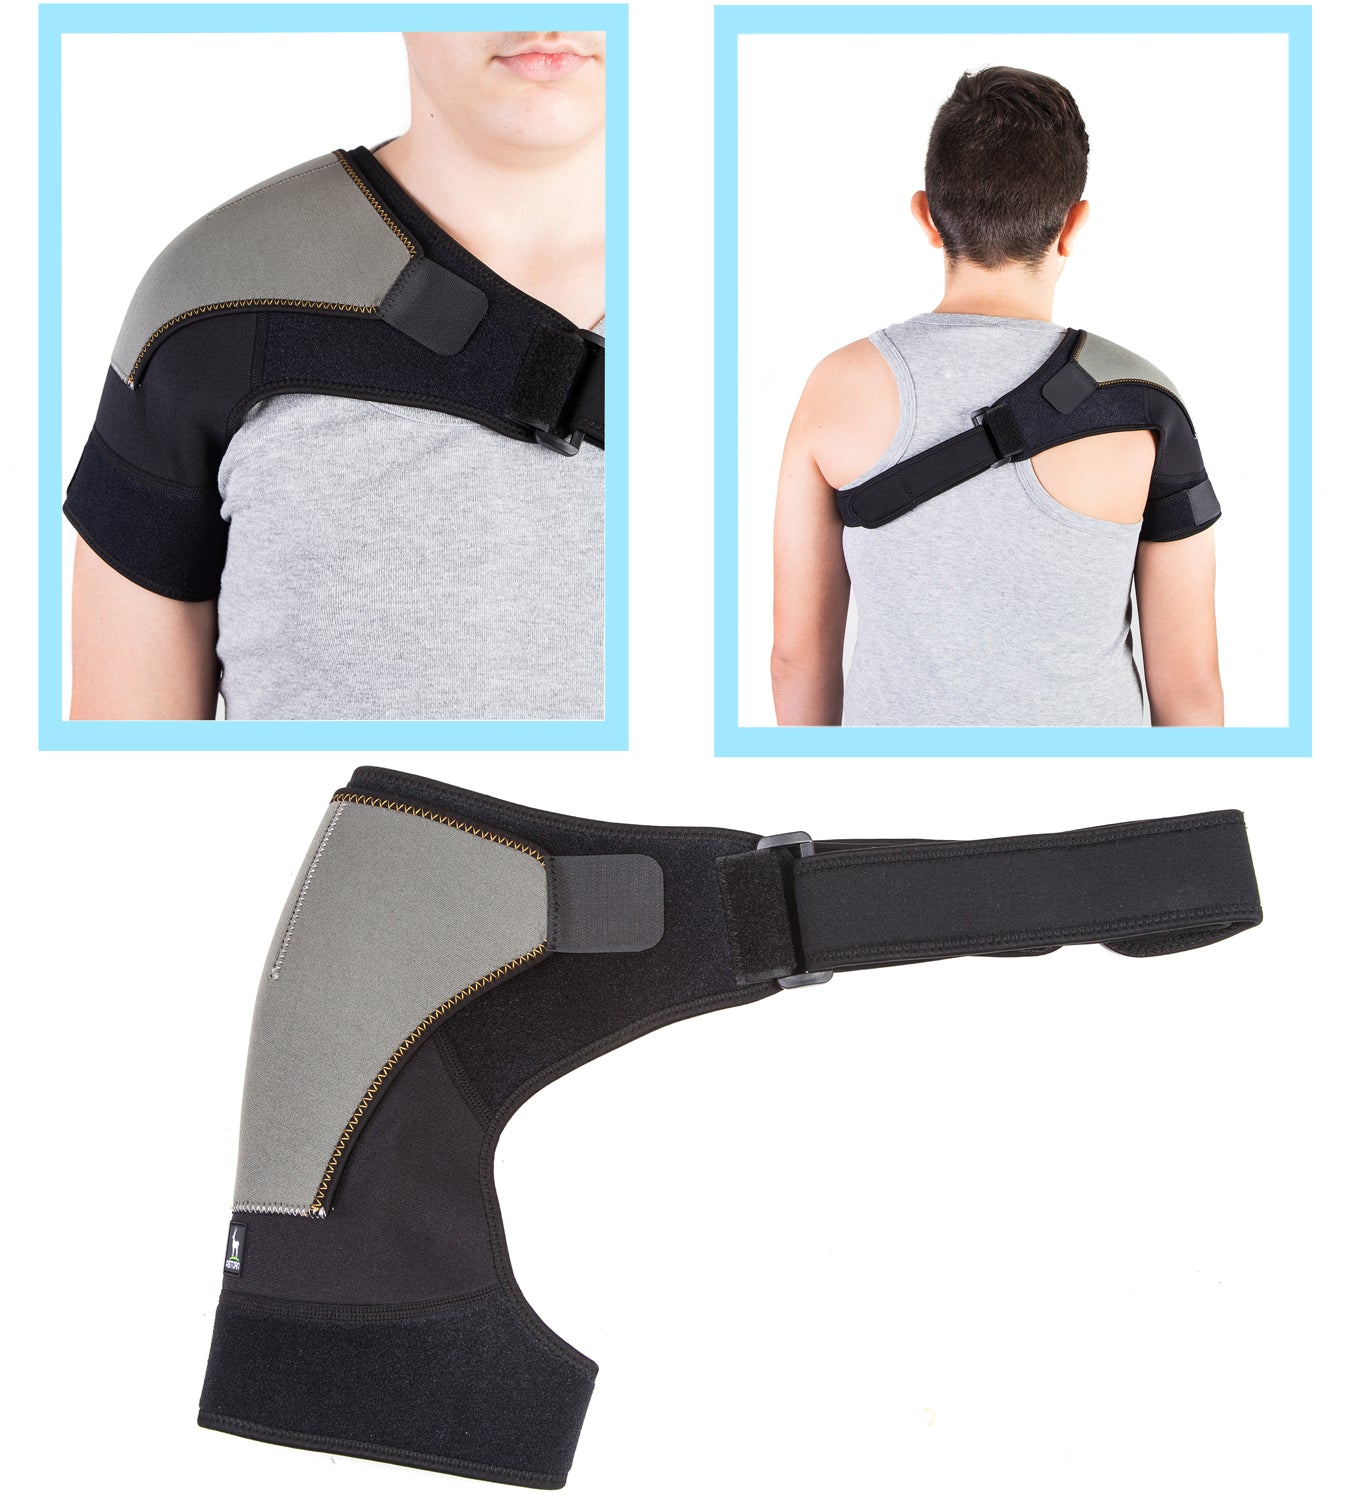  Shoulder Brace for Women & Men, Support for Torn Rotator Cuff  & Other Shoulder Injury - Ac Joint, Dislocated, Separated, Frozen Shoulder, Neoprene Compression Wrap